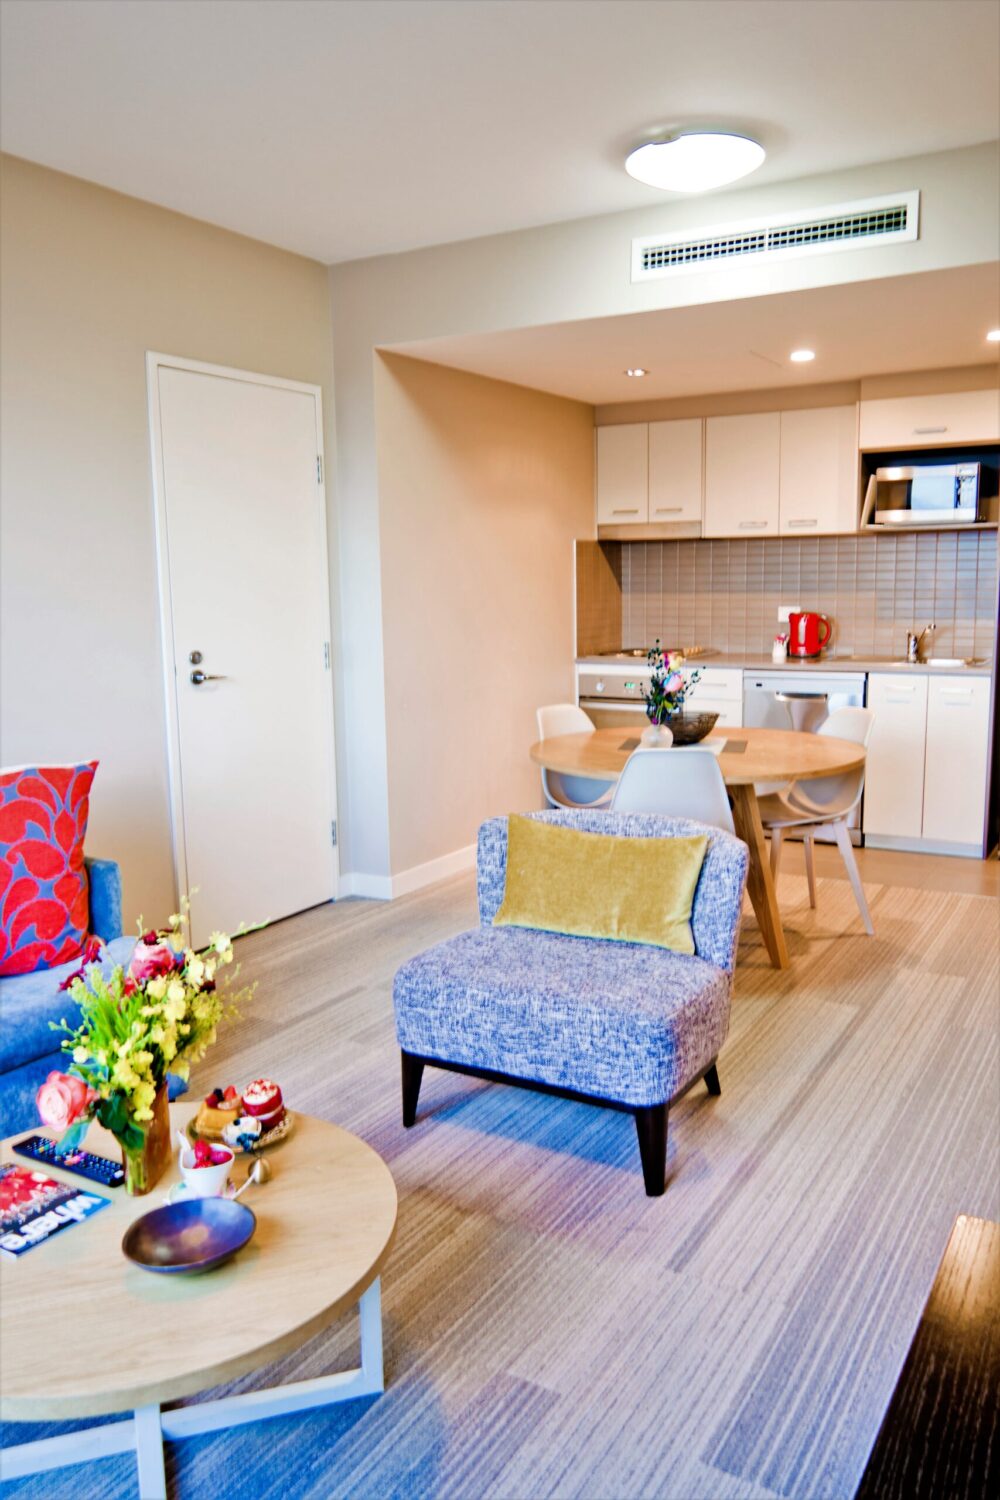 Quest Mascot Apartment Hotel With Accessible Accommodation